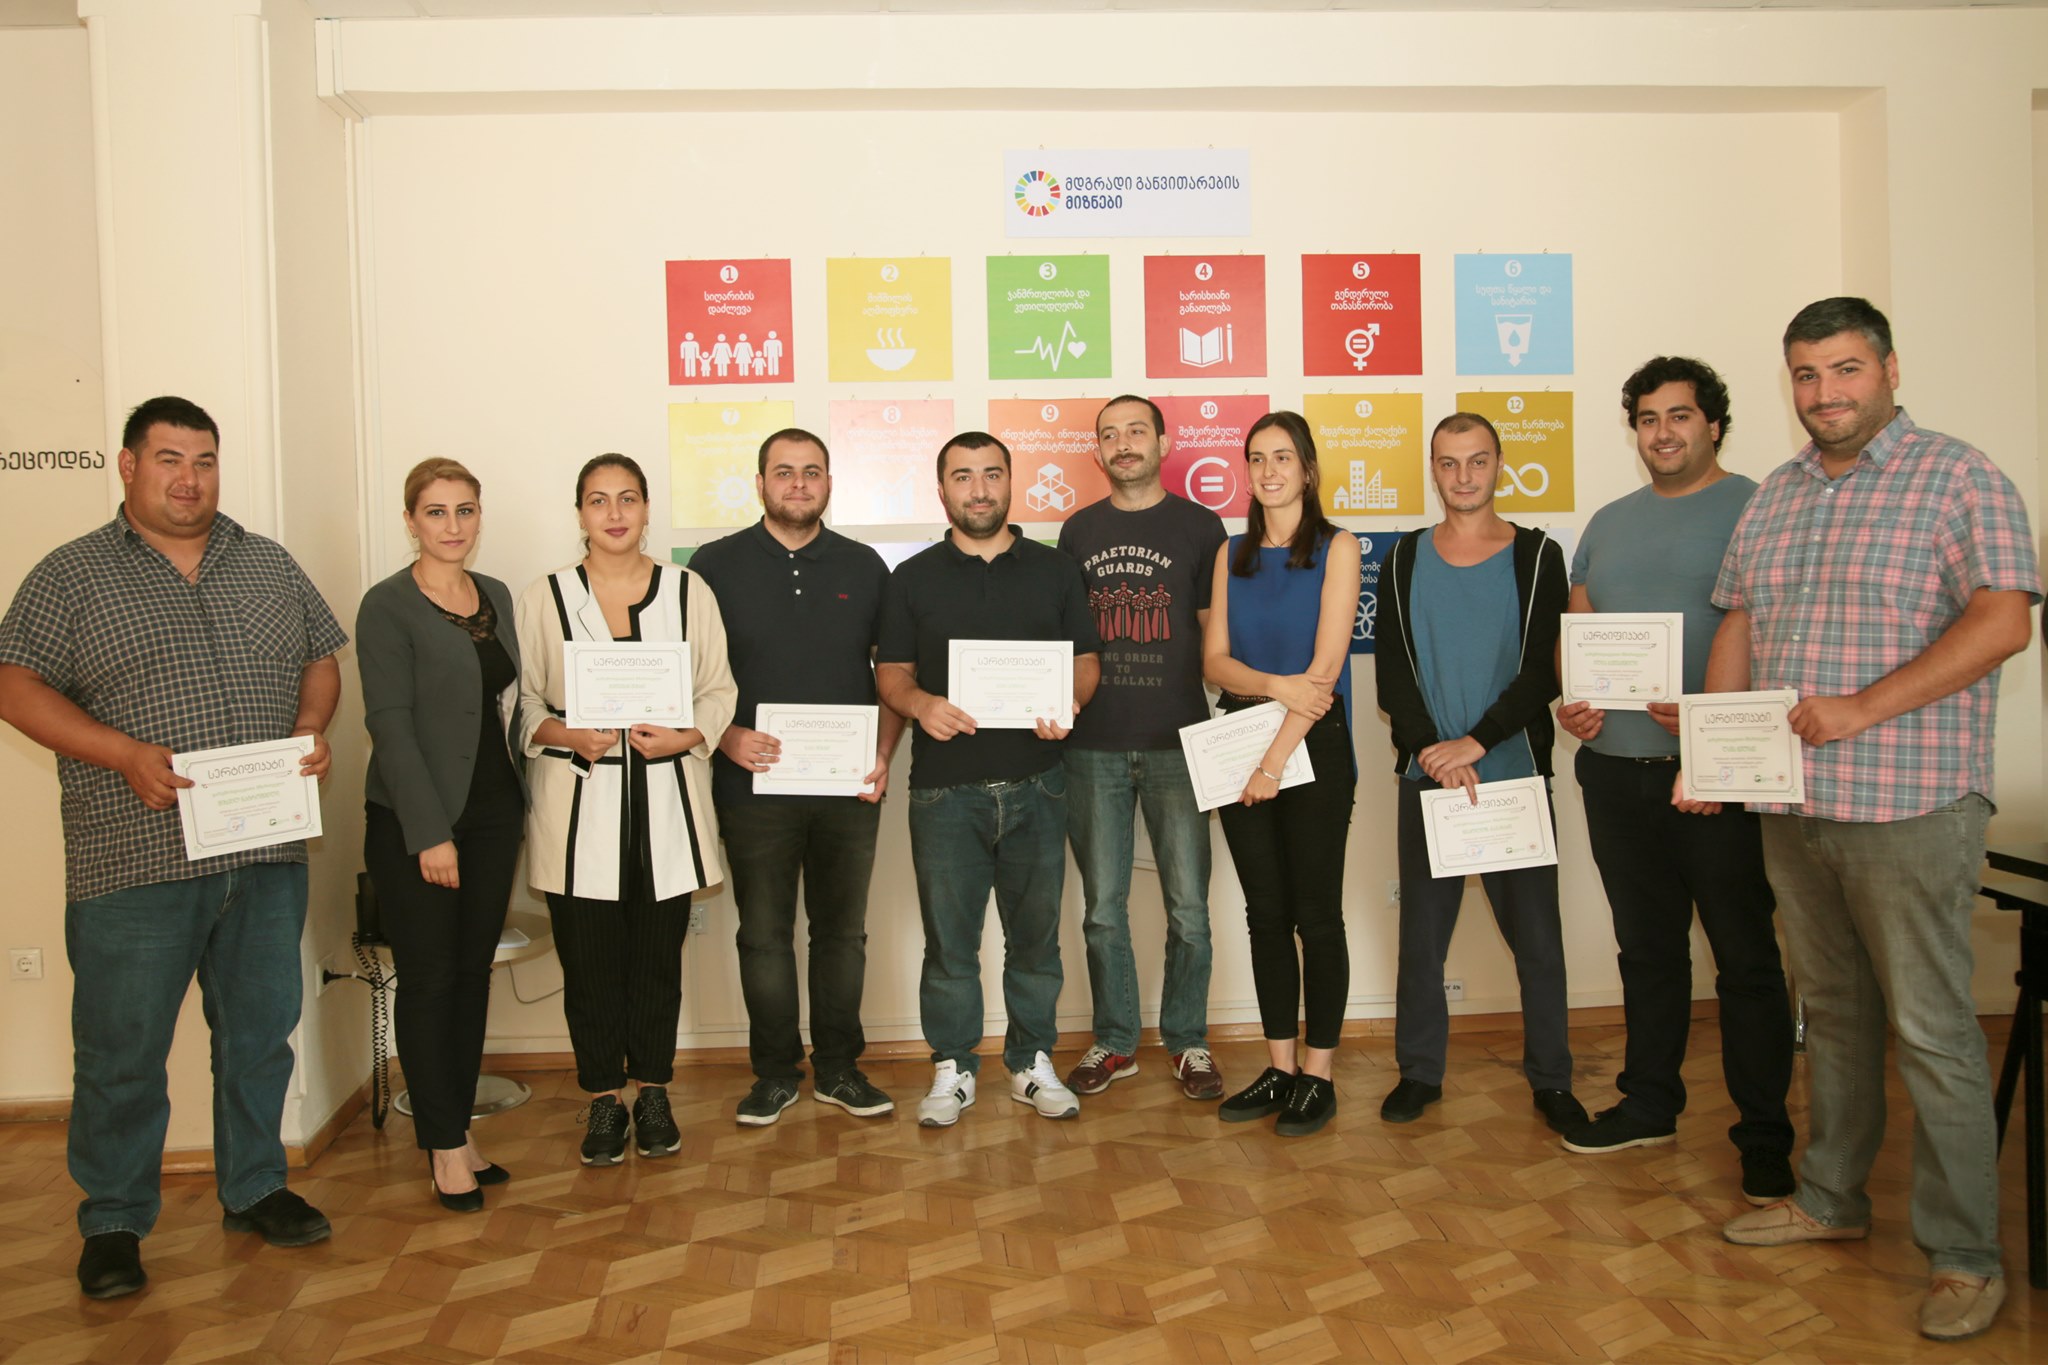 The education course,, Environmental Manager’’ has ended